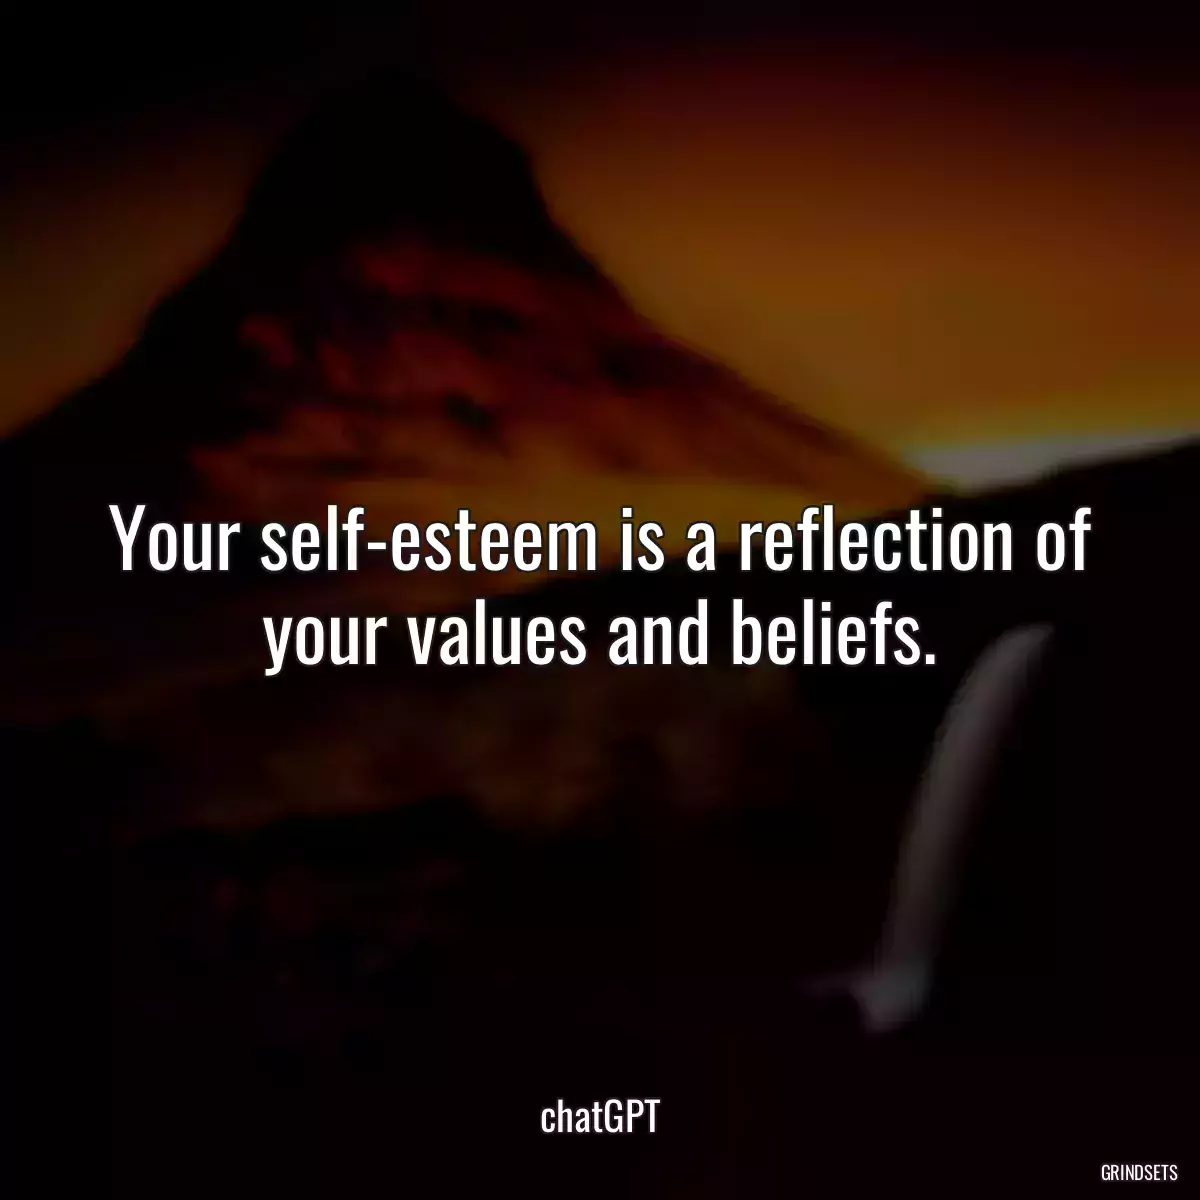 Your self-esteem is a reflection of your values and beliefs.